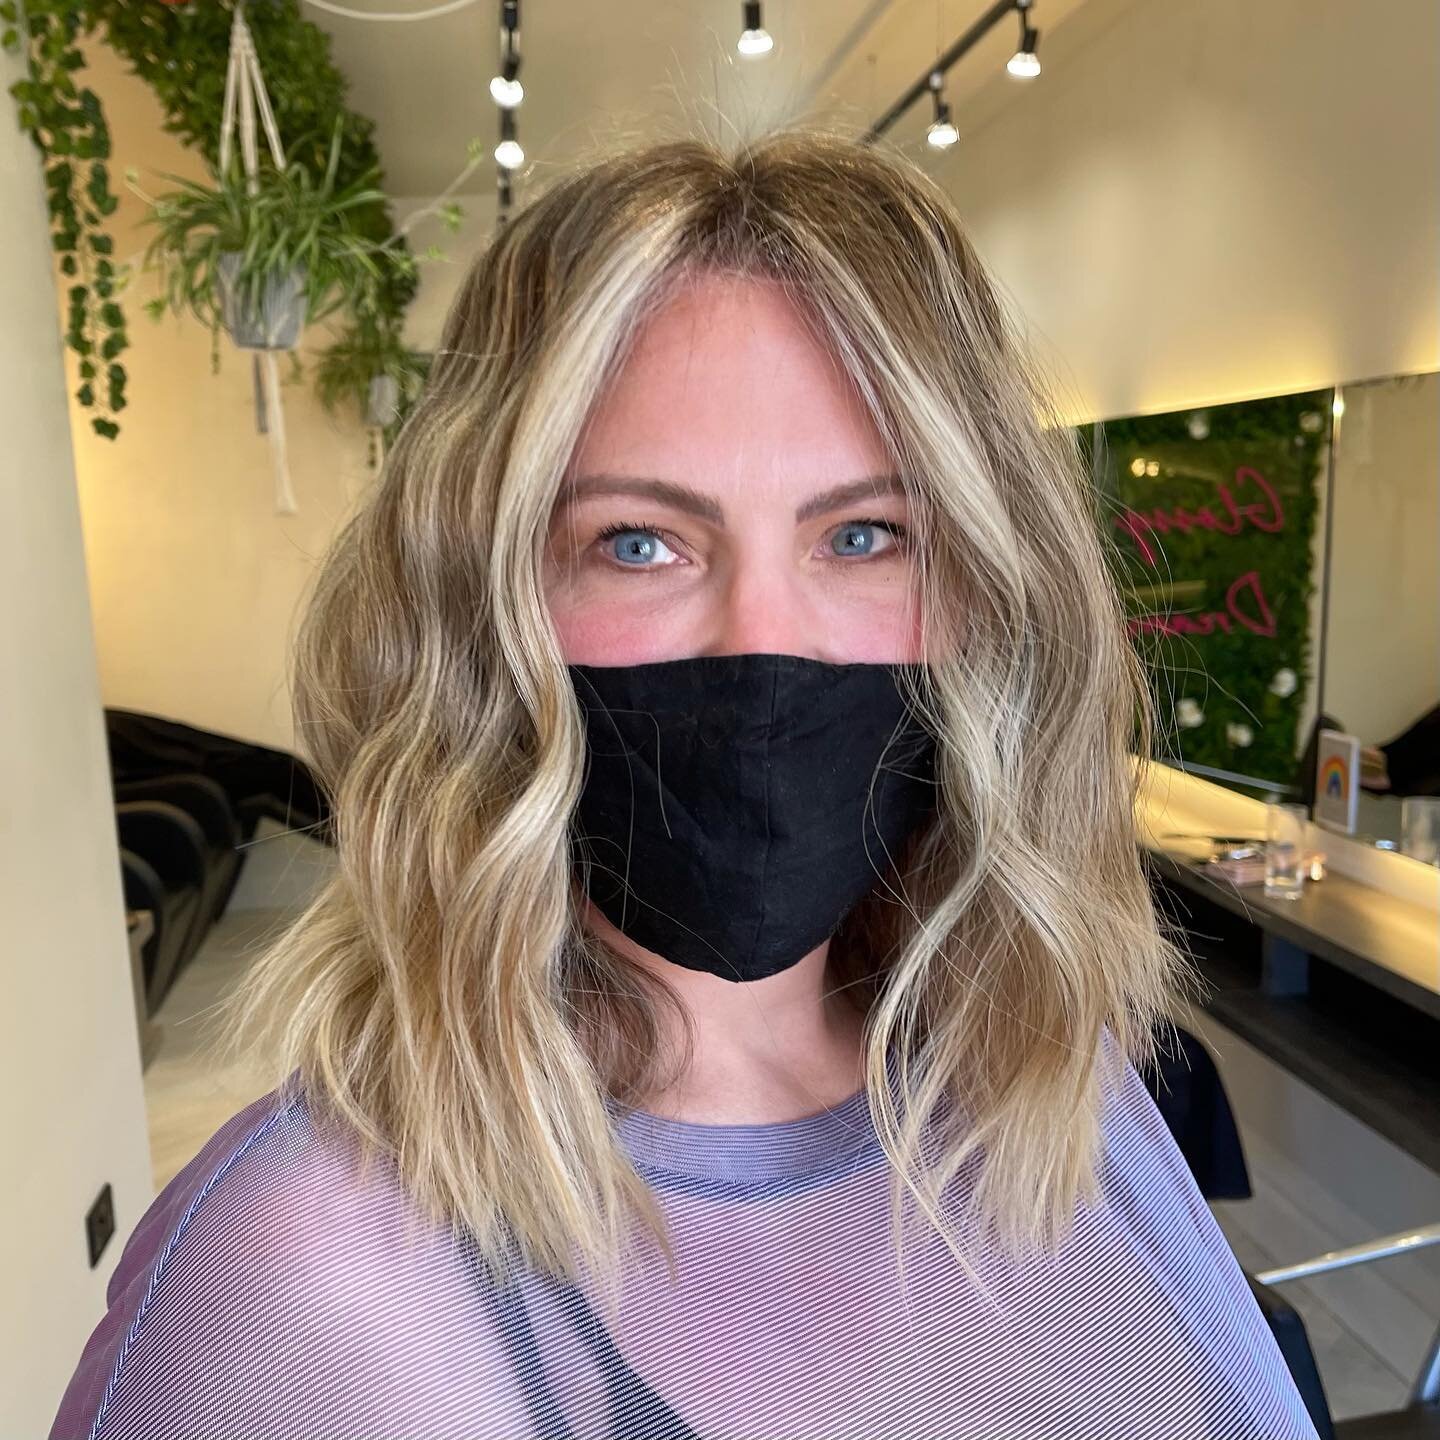 Another phenomenal #MetalDetox transfo on our buddy @ali_bespokemakeupartistry_

Full head of #livedinfoils, tip out, zone tone and restyle by @dodgerido

More of this please!!! &hearts;️

#haircolour #blondehair #balayage #csconnective #loreal #hair